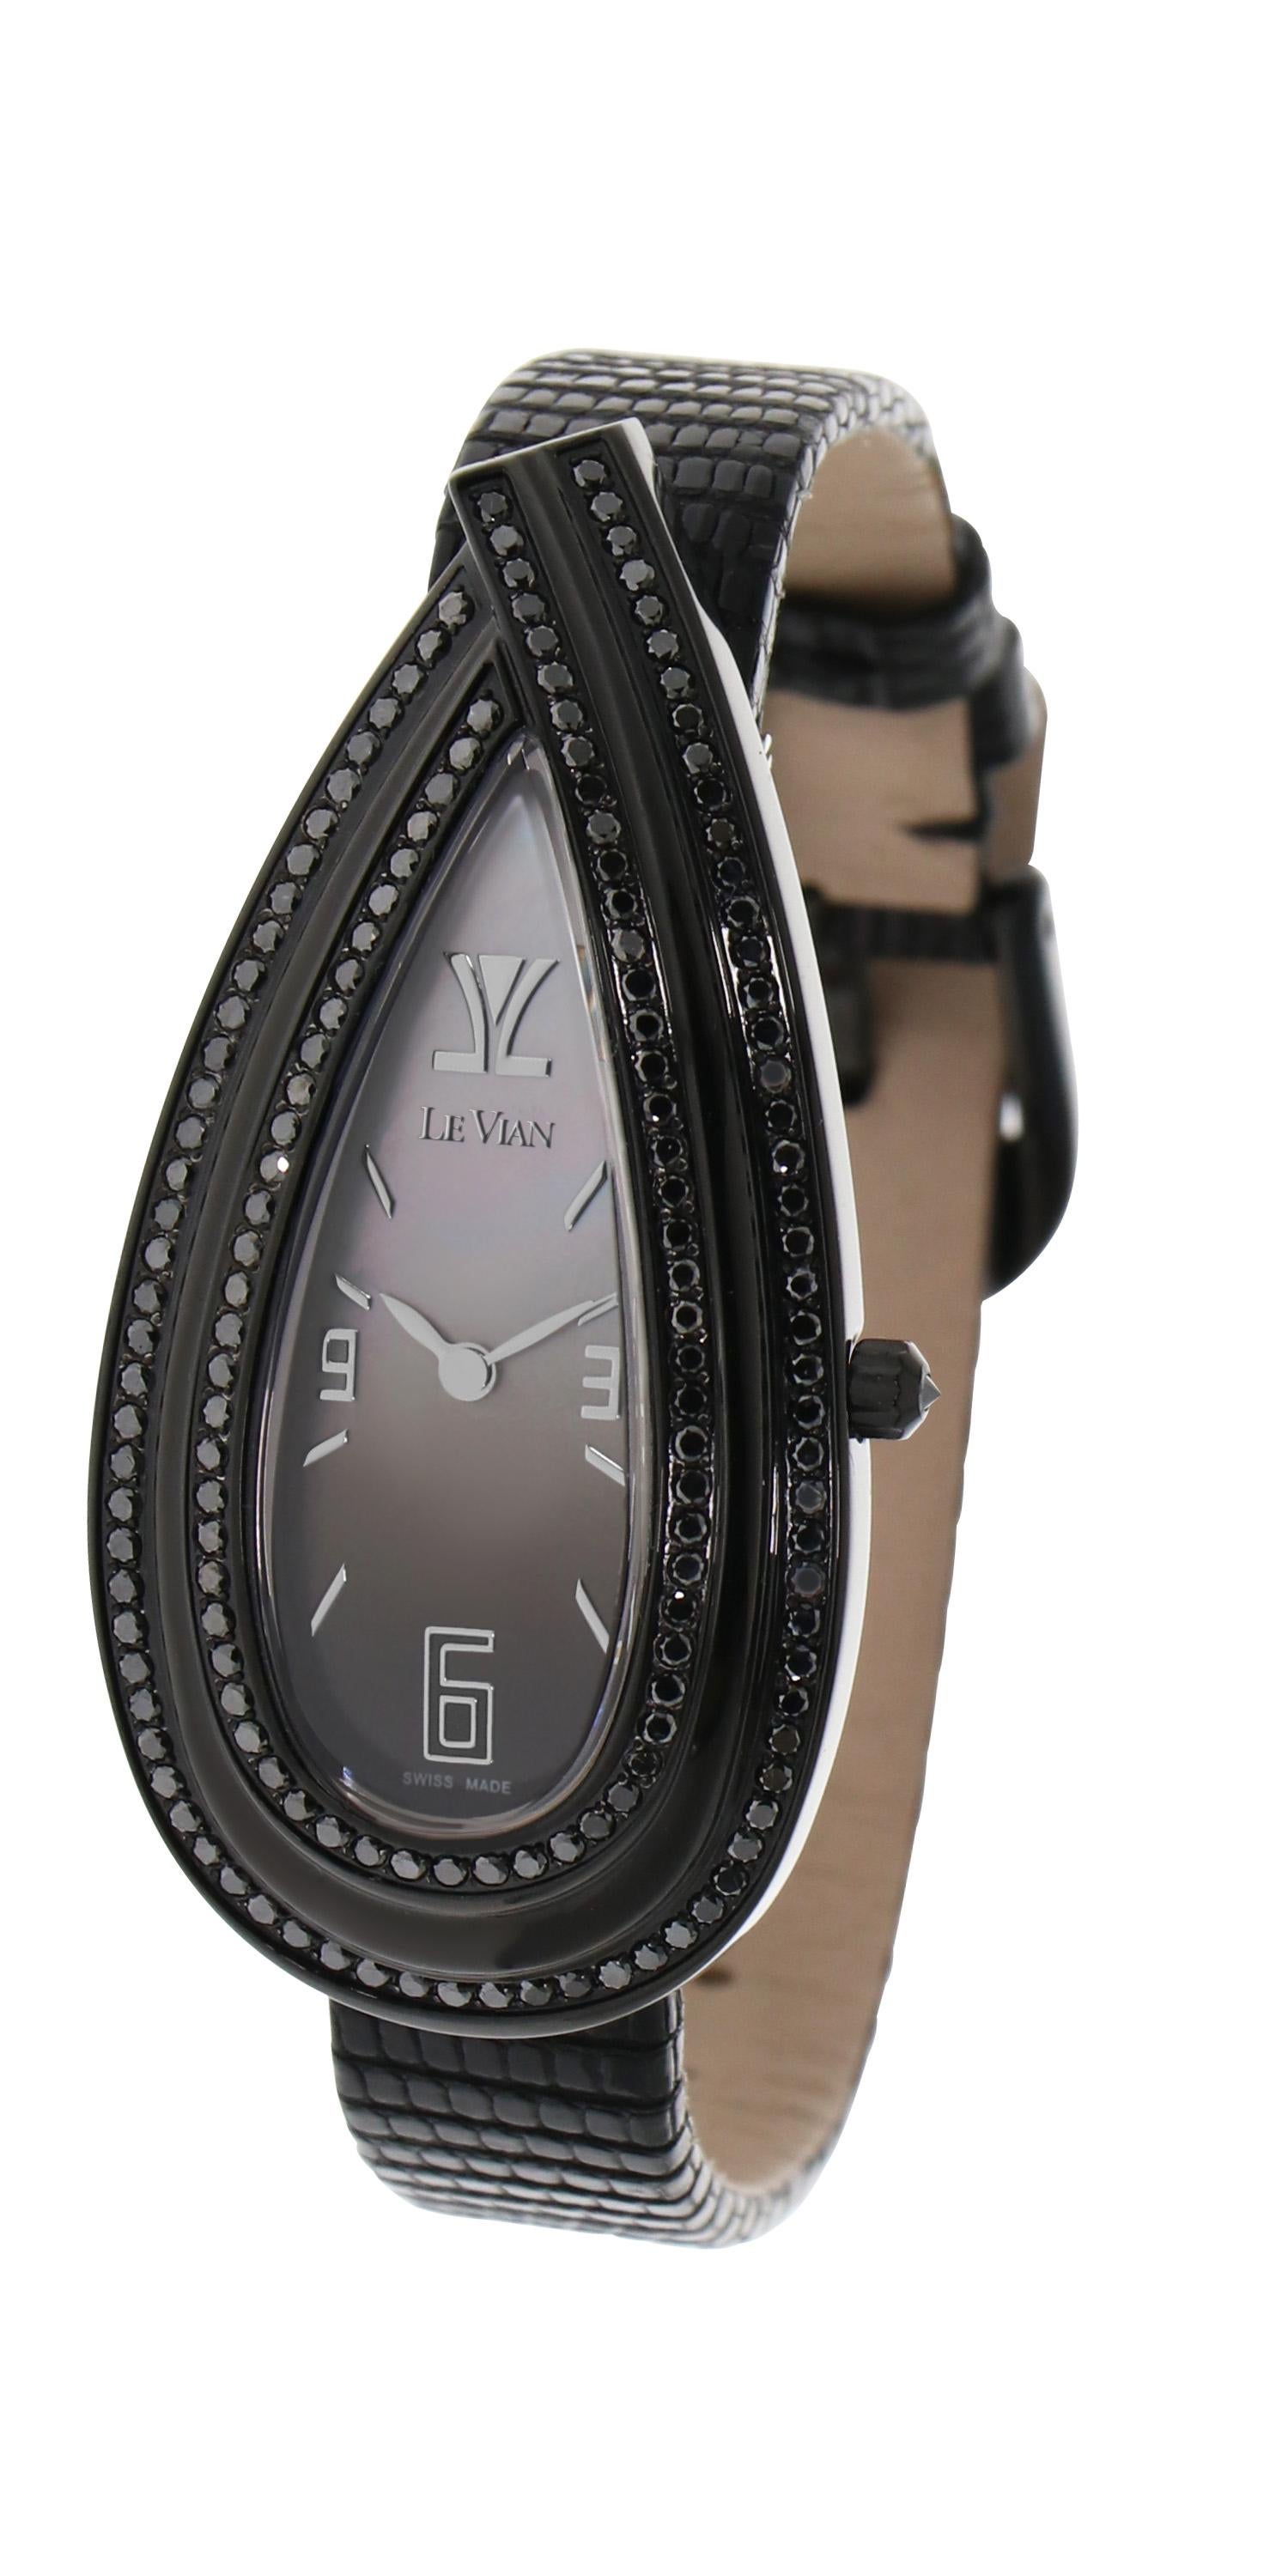 Le Vian 27mm Teardrop Wristwatch featuring 2.07cts of Blackberry Diamonds in Blackberry Stainless Steel with a genuine Lizard Leather Band
